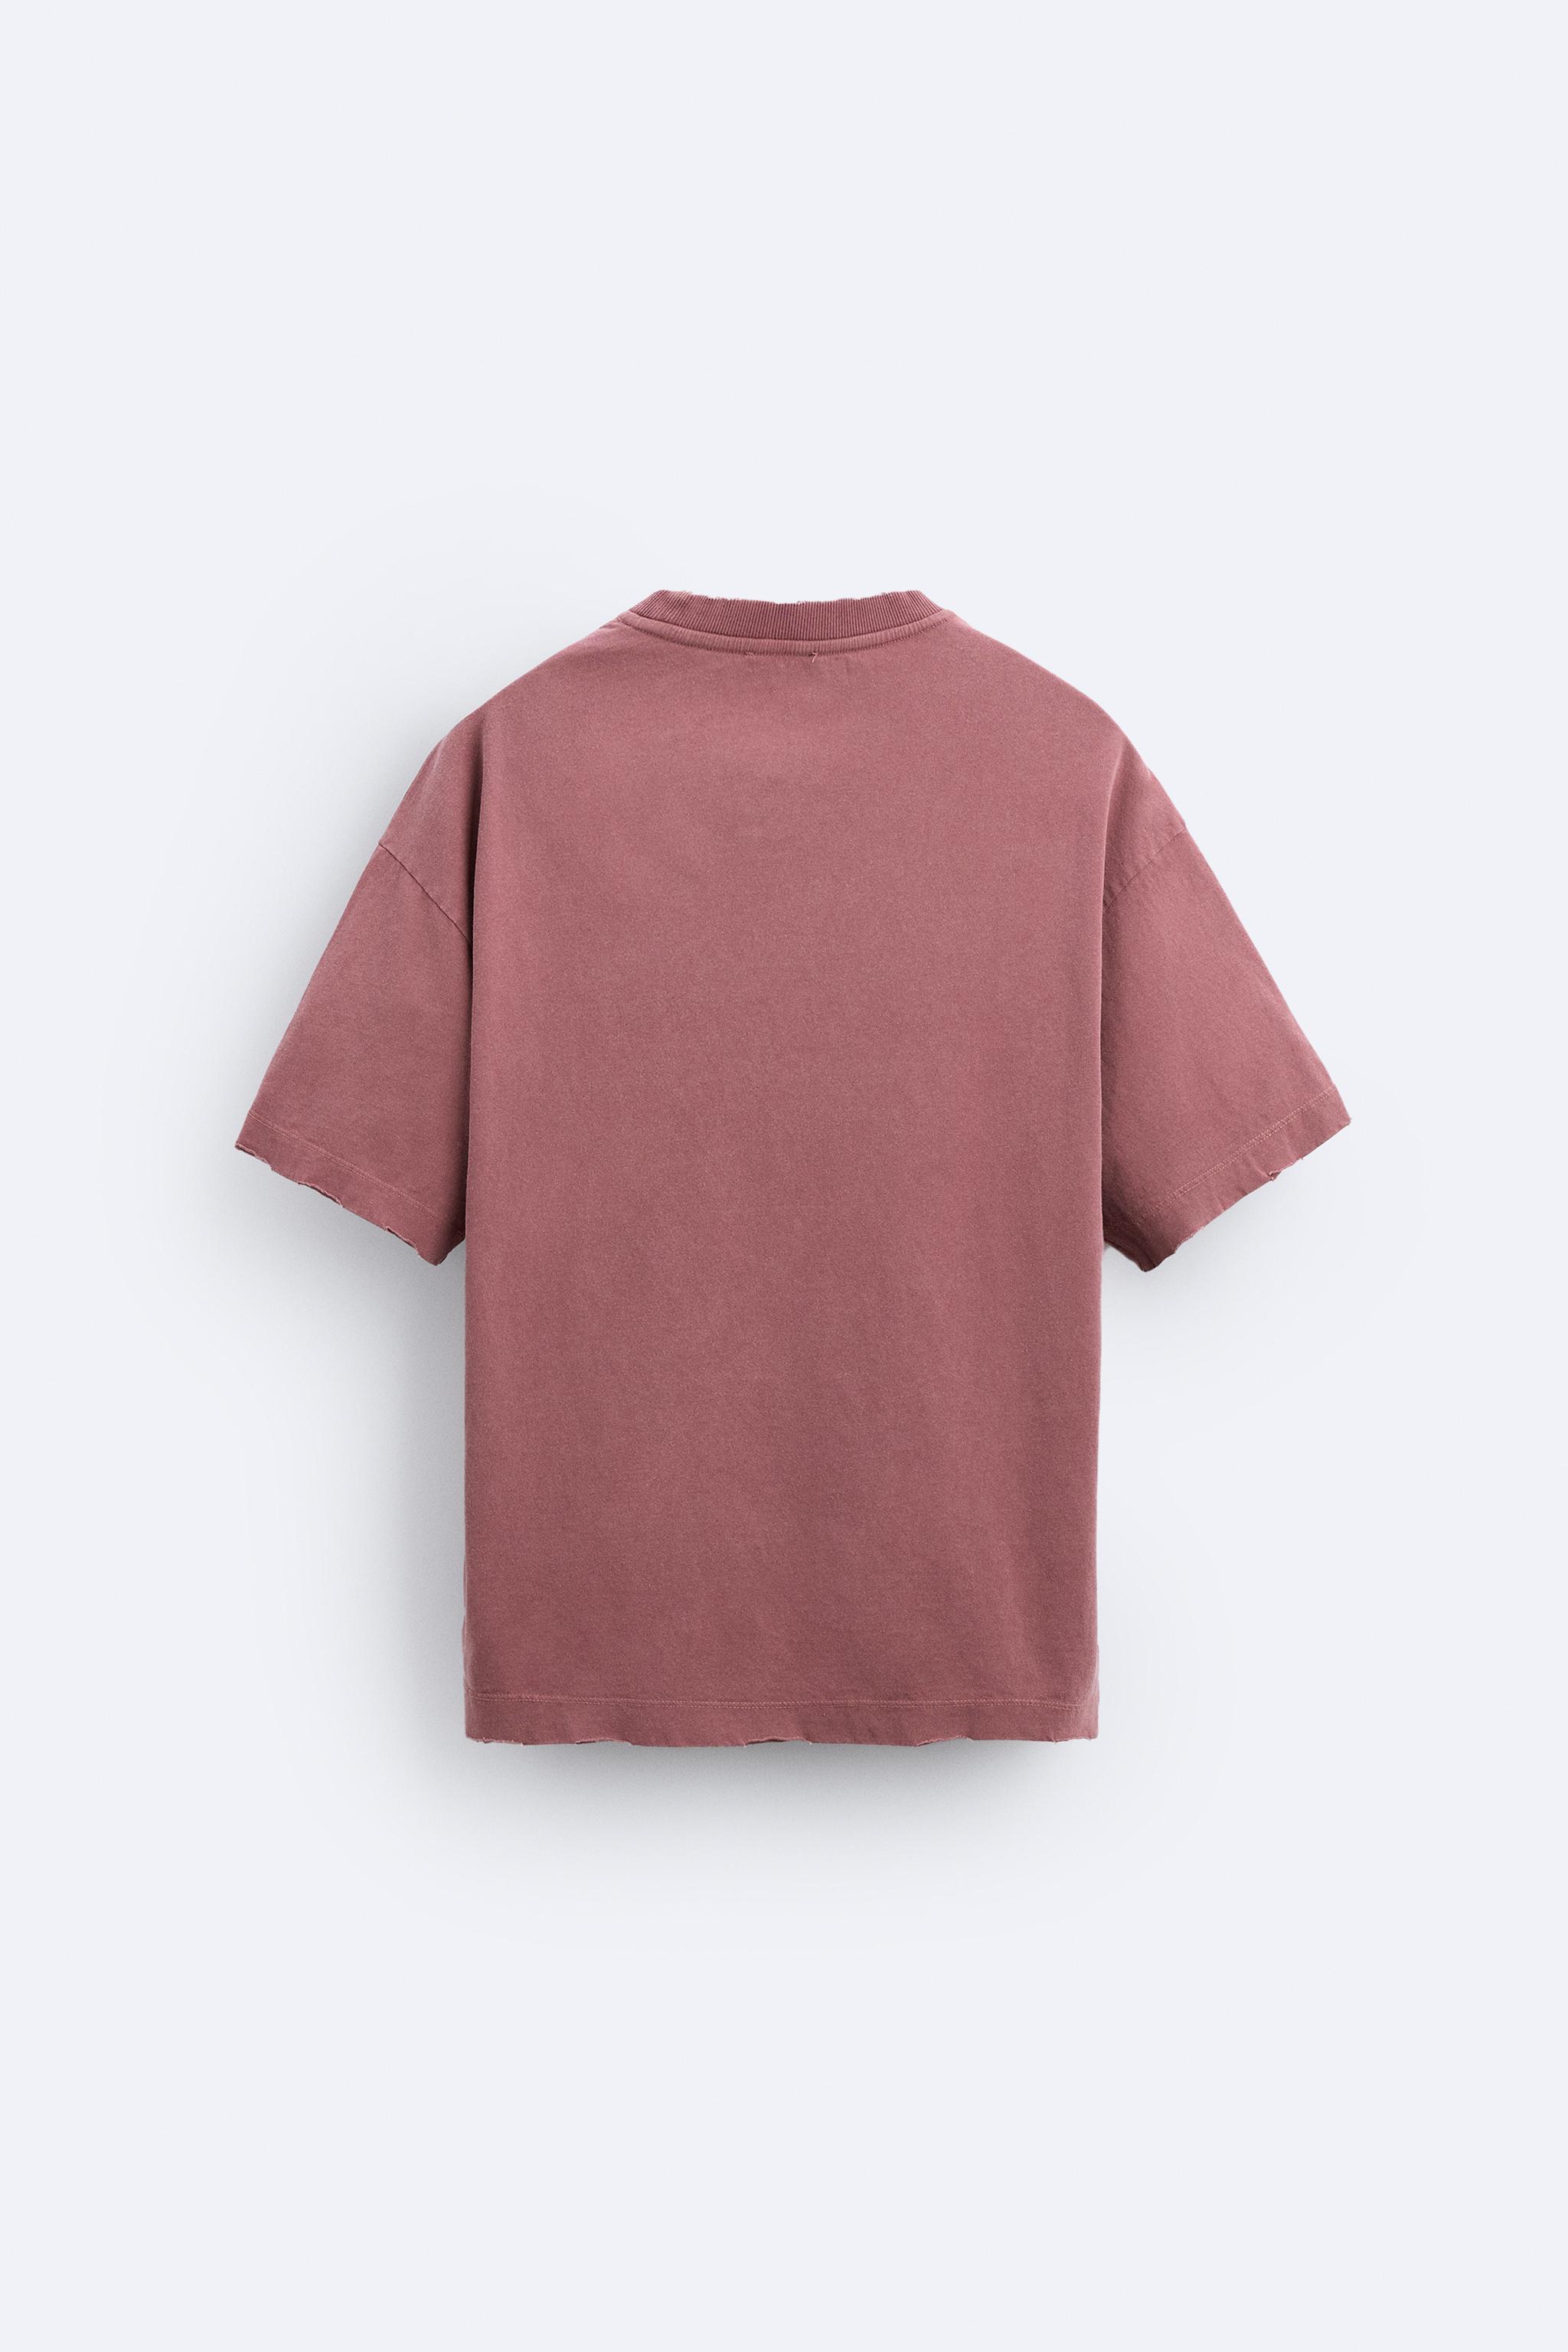 RAISED TEXT T-SHIRT - Faded pink | ZARA United States